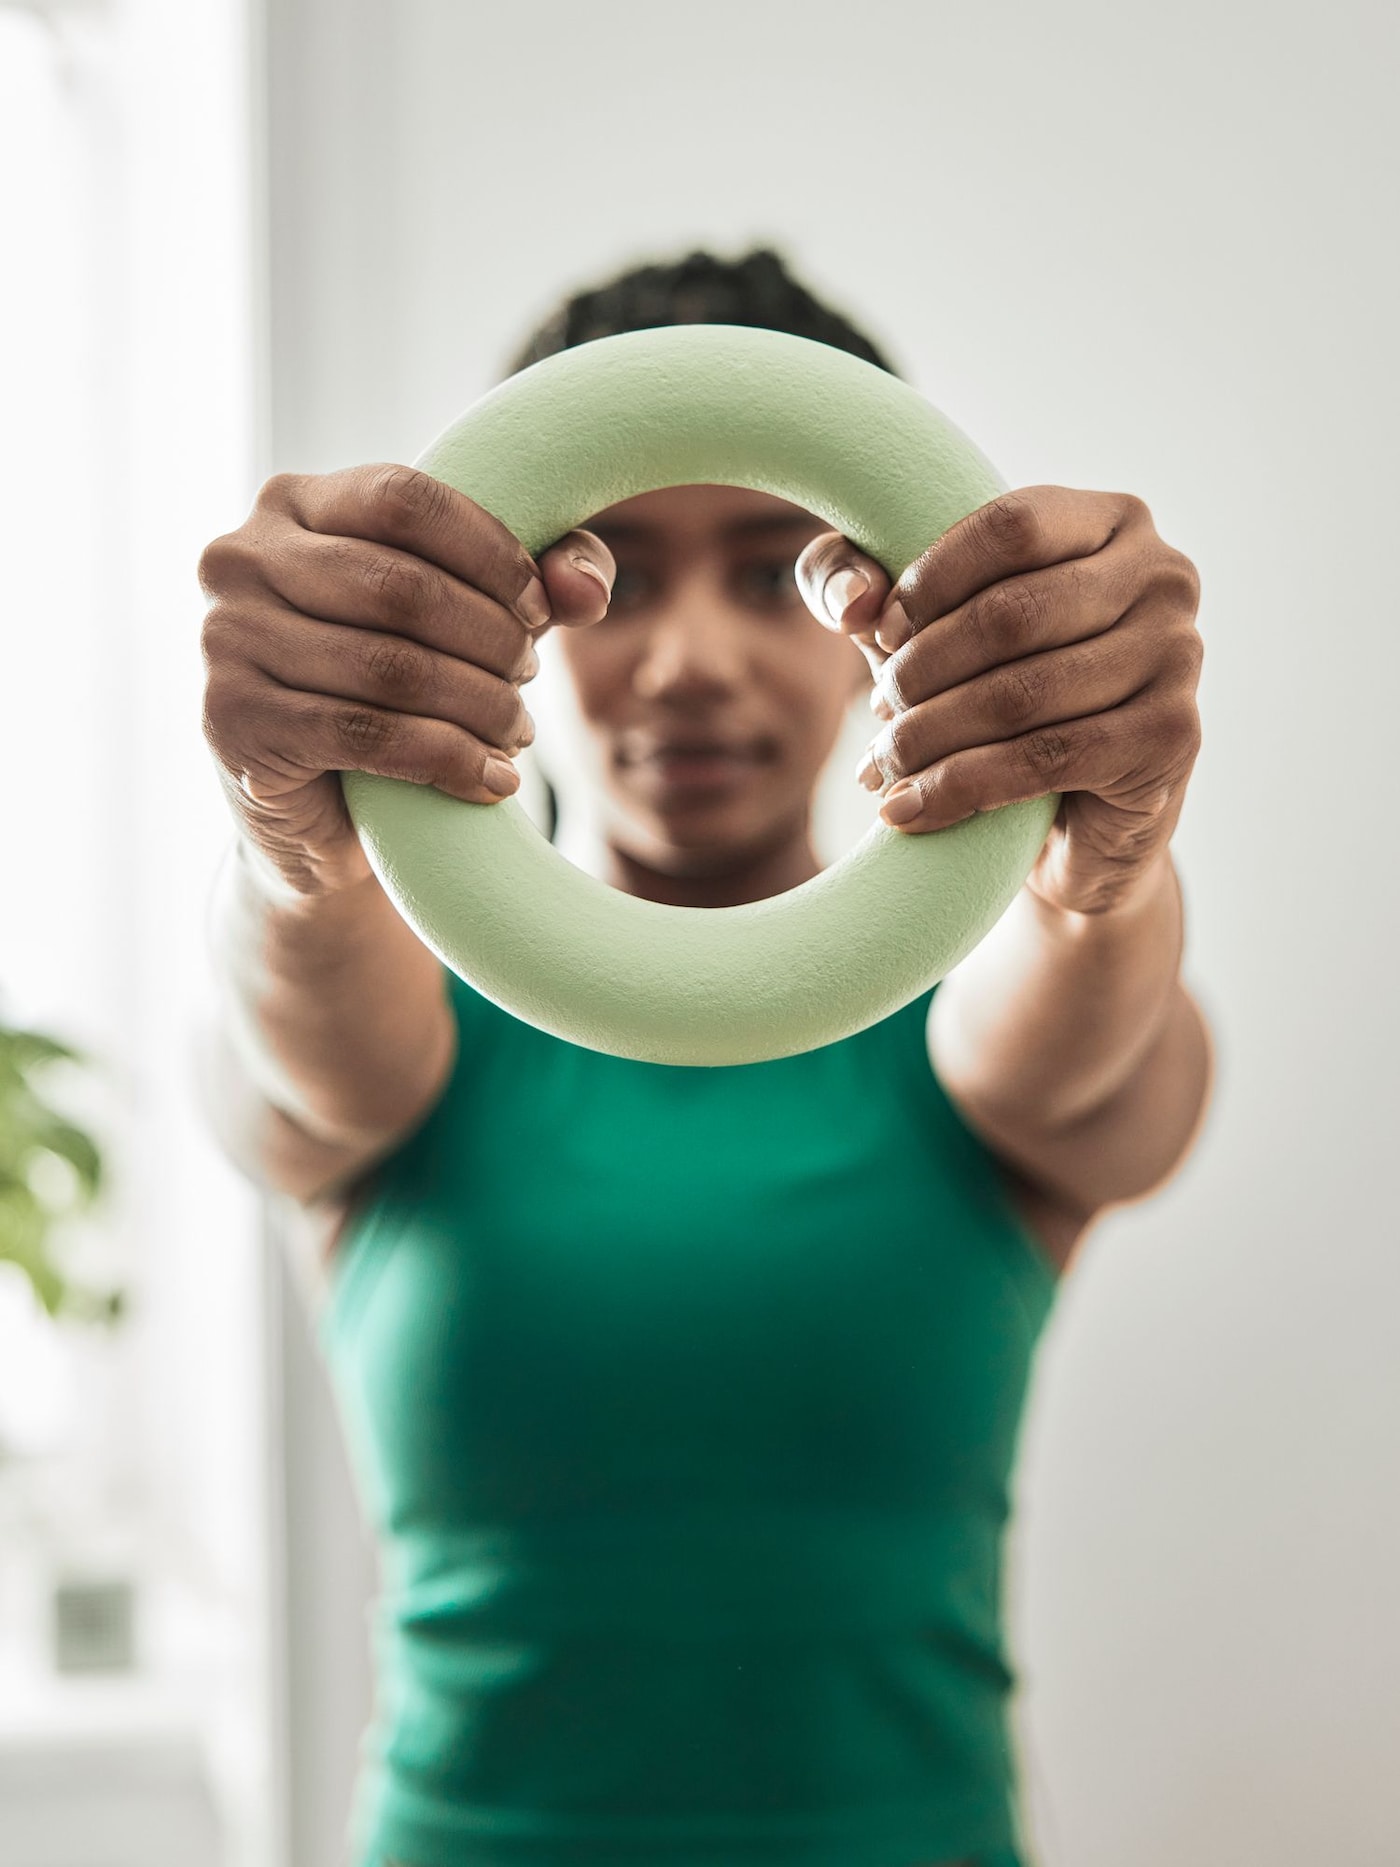 A young woman in a green vest holds a training ring in front of her. She is looking through the ring as she trains.